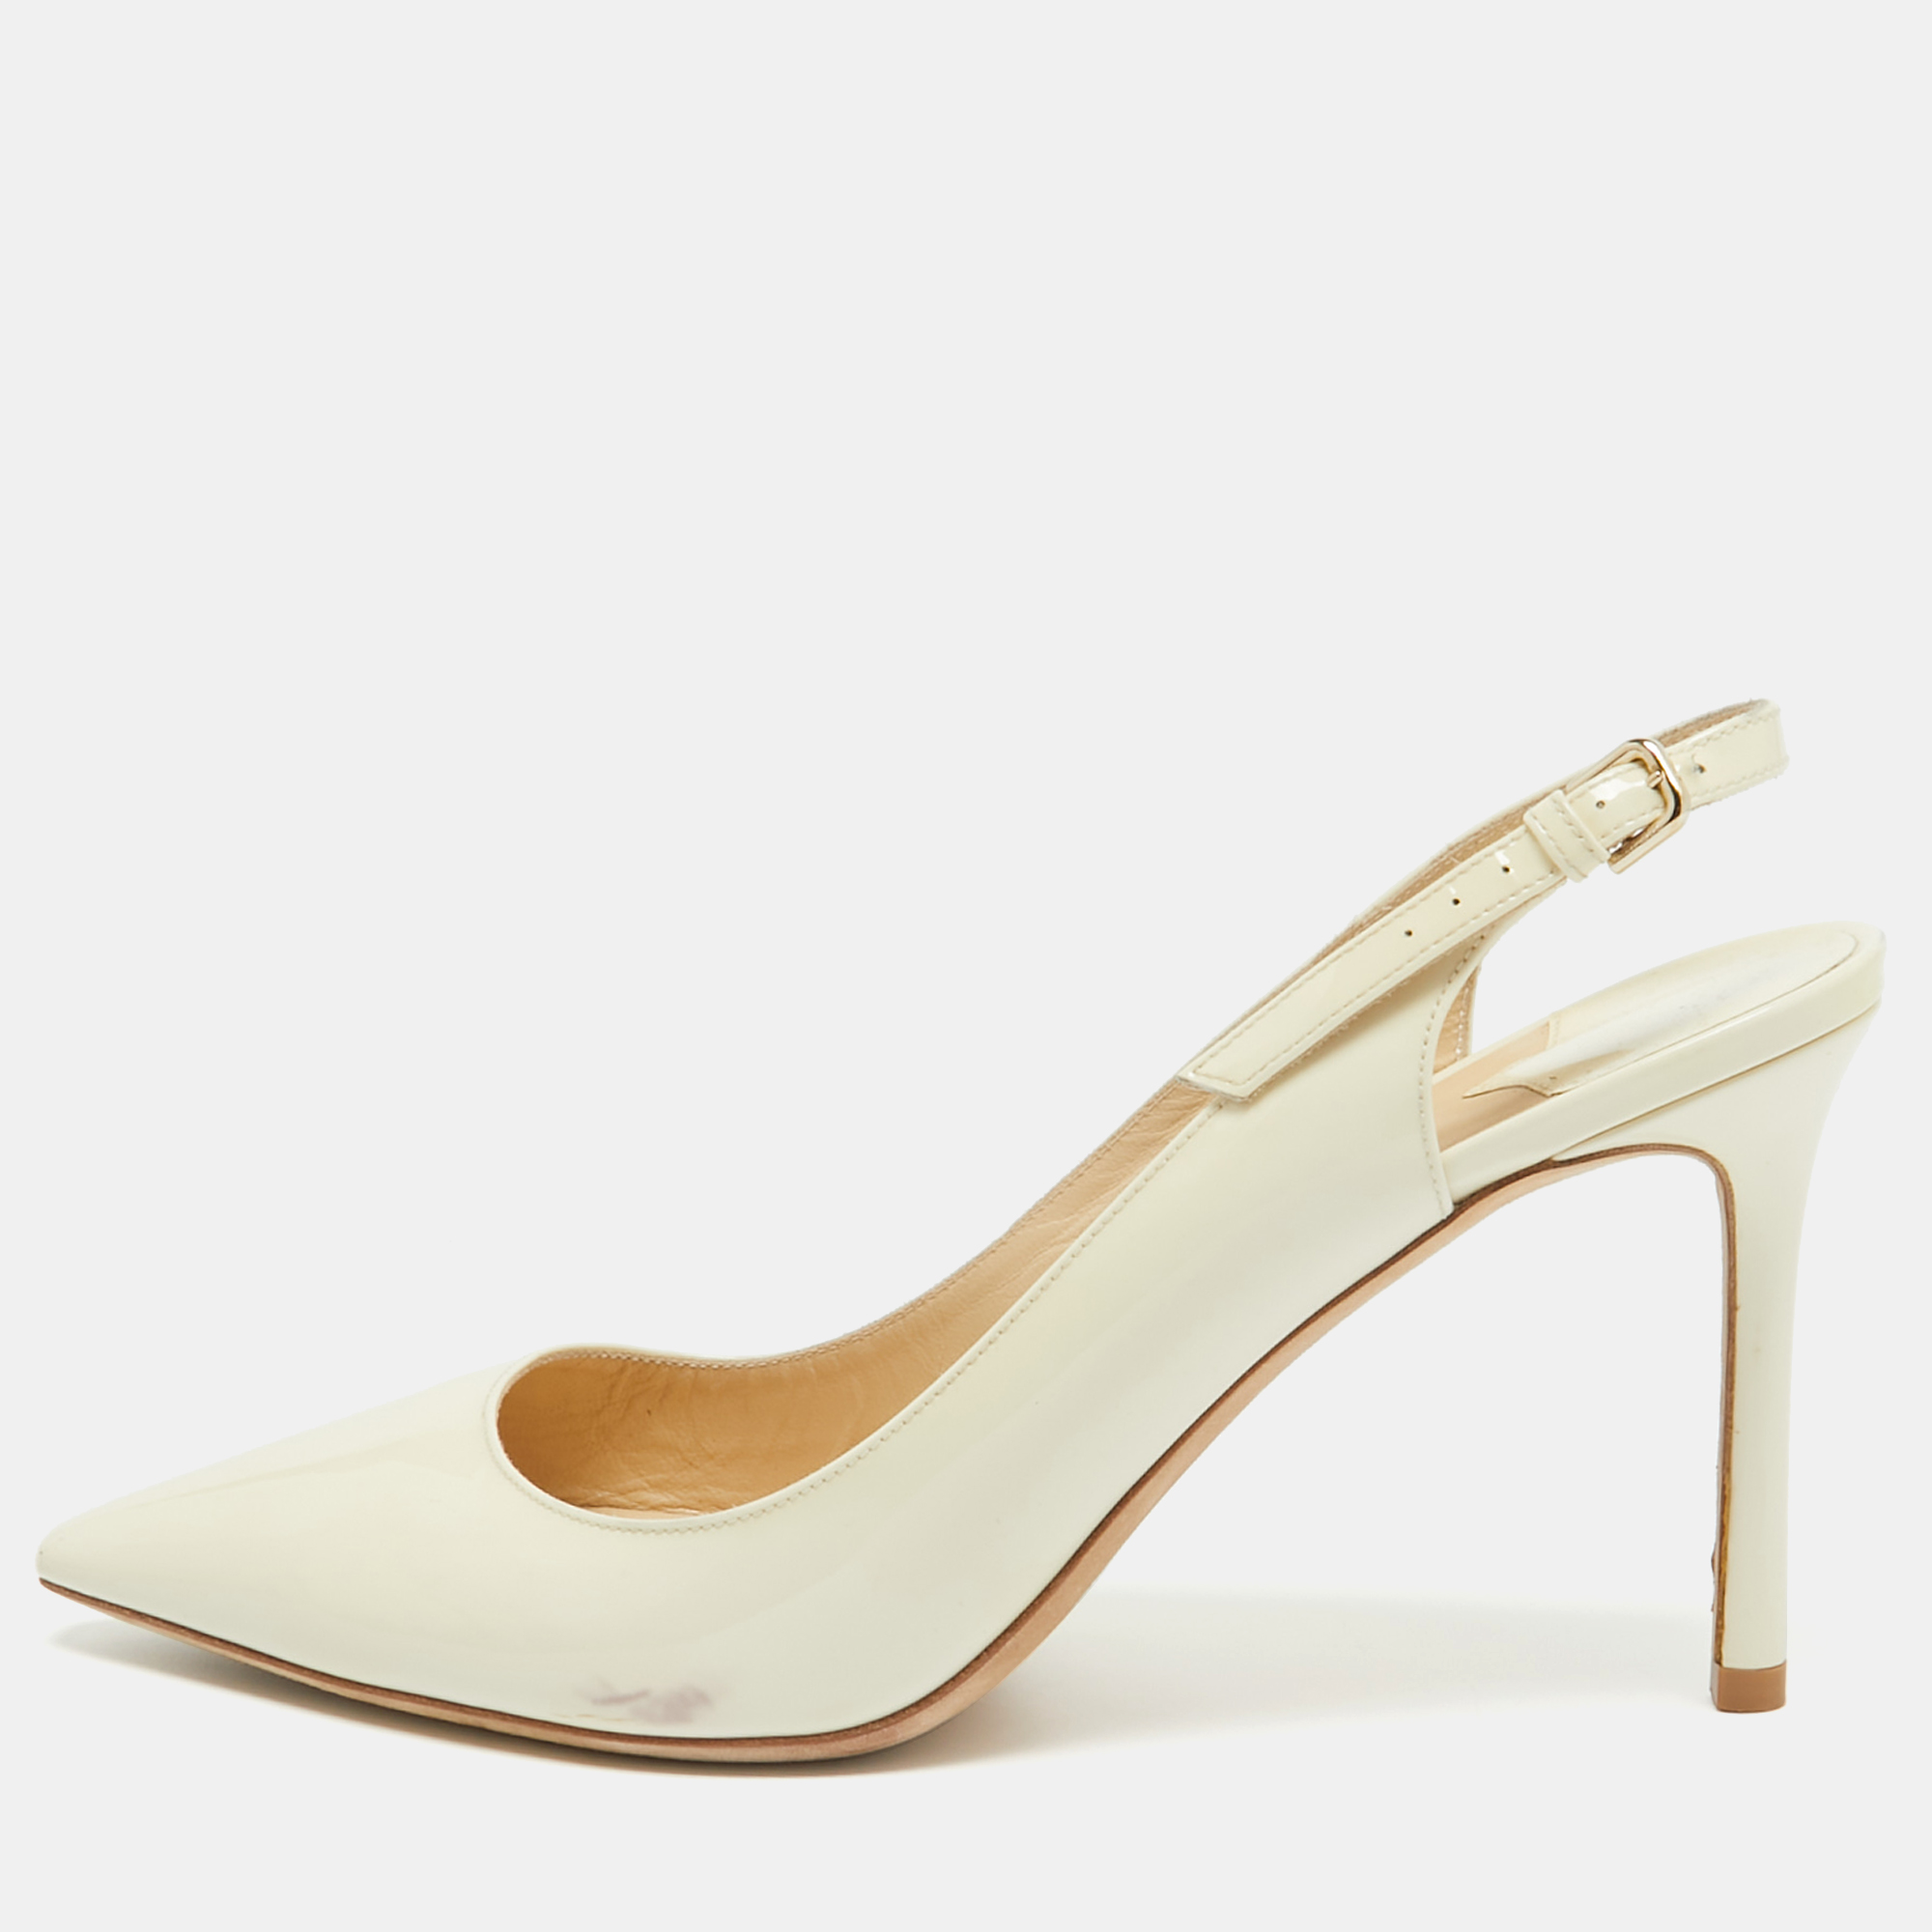 Jimmy choo cream patent leather slingback pointed toe pumps size 41